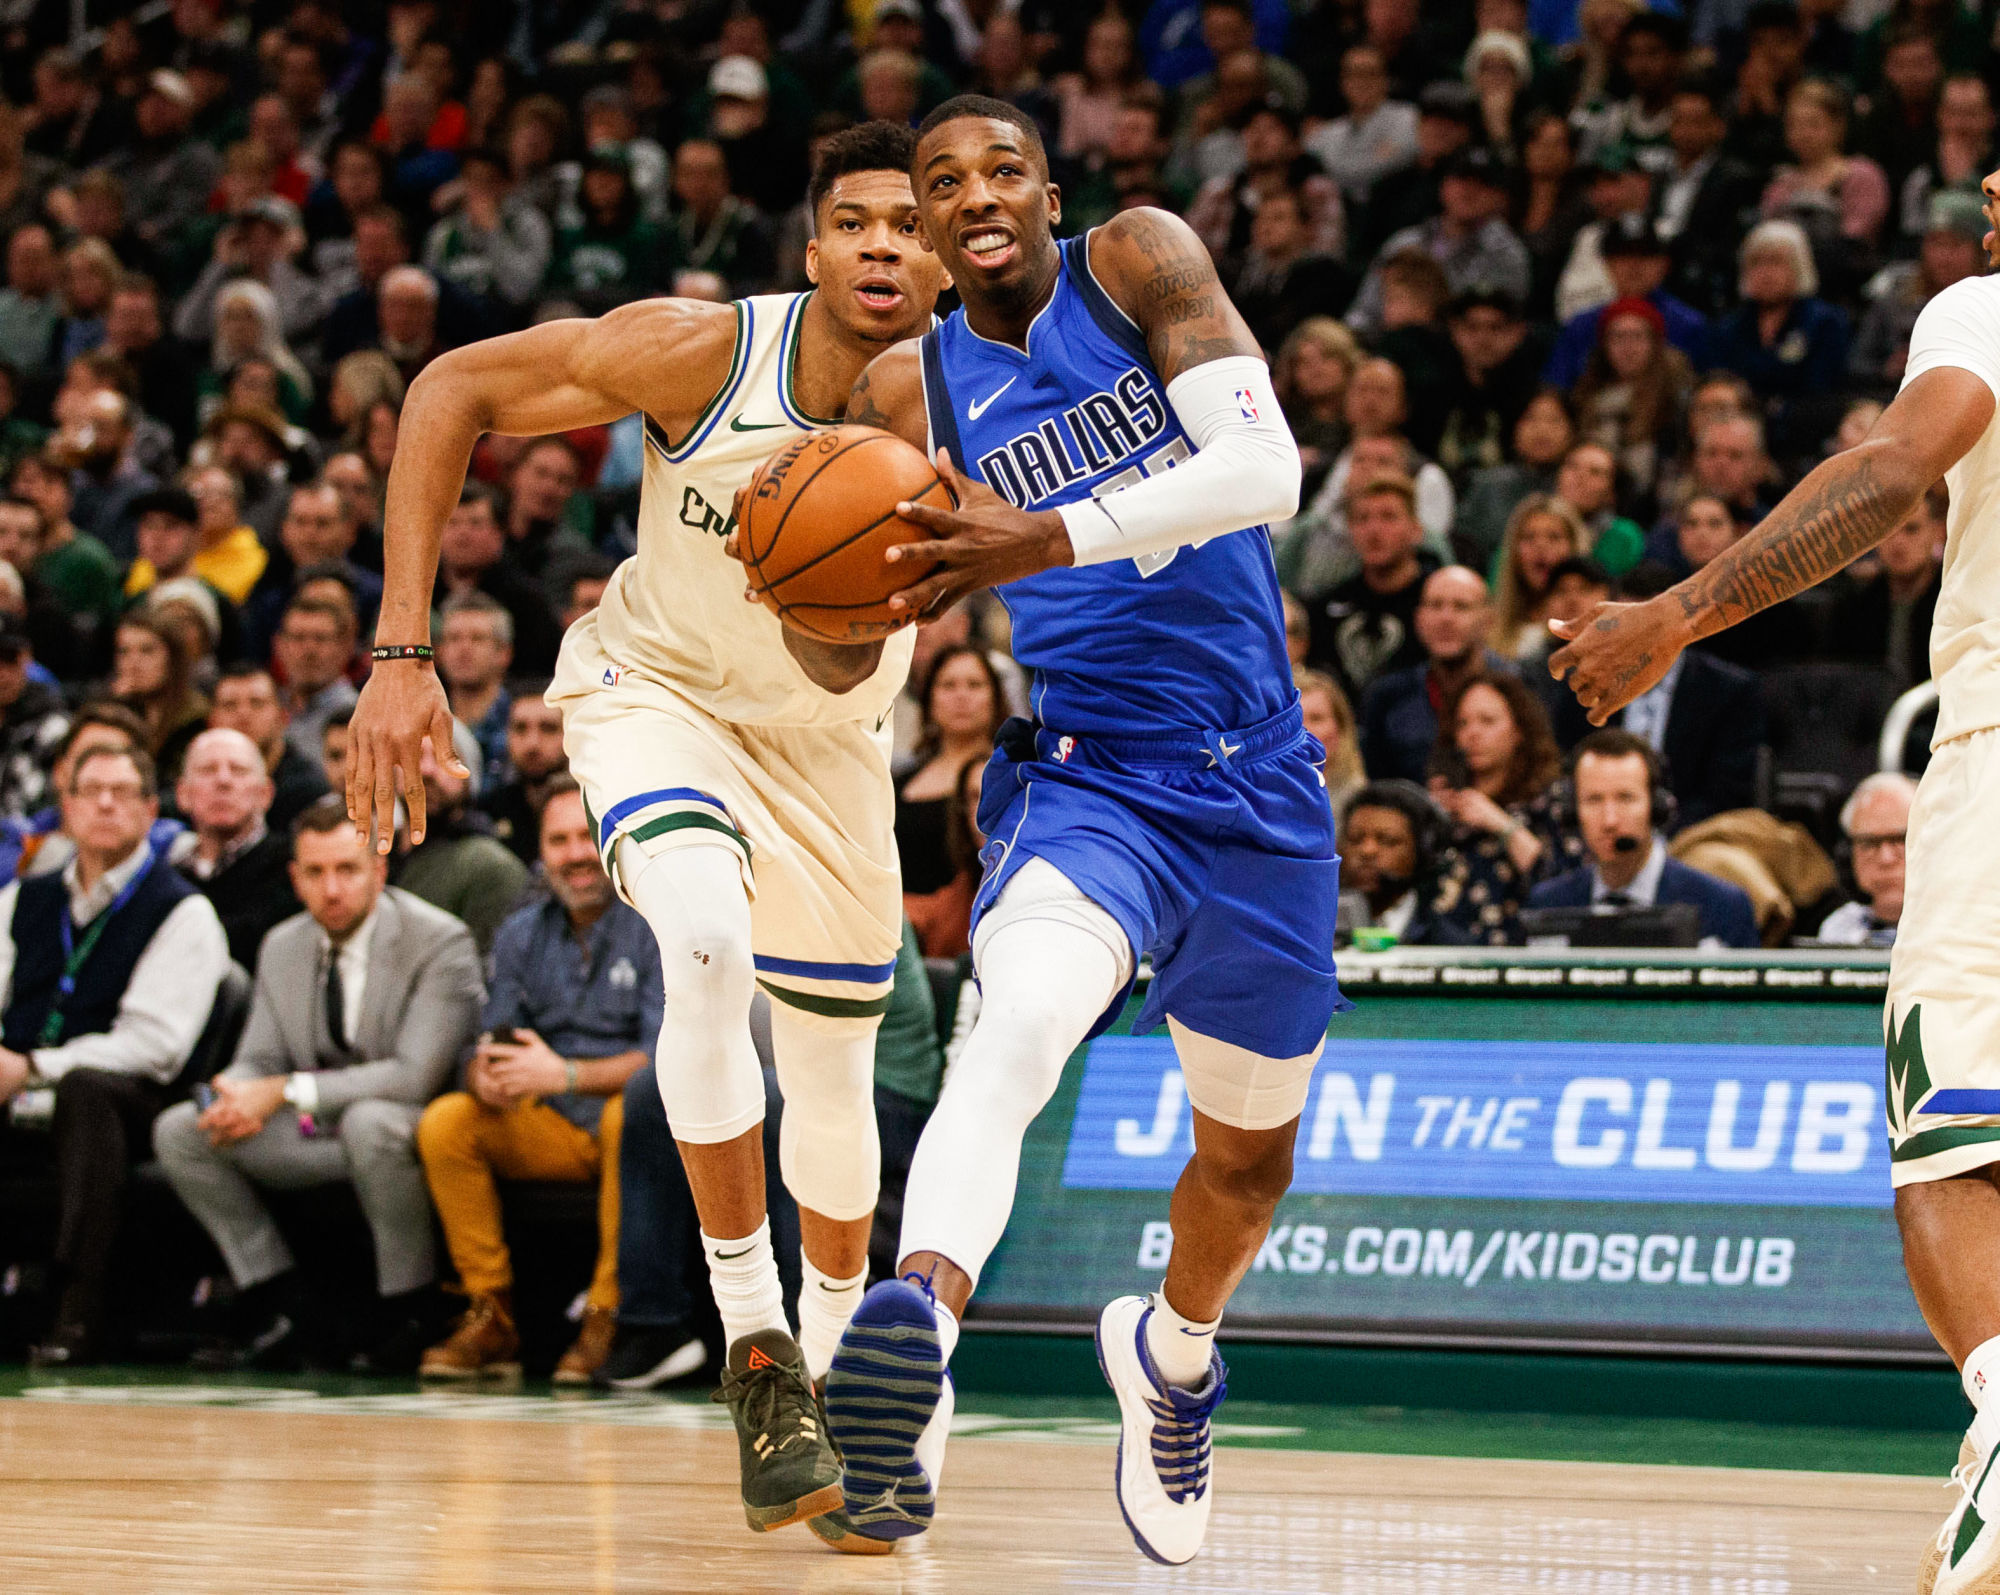 Dec 16, 2019; Milwaukee, WI, USA; Dallas Mavericks guard Delon Wright (55) drives for the basket in front of Milwaukee Bucks forward Giannis Antetokounmpo (34) during the fourth quarter at Fiserv Forum. Mandatory Credit: Jeff Hanisch-USA TODAY Sports/Sipa USA 

Photo by Icon Sport - Fiserv Forum - Milwaukee (Etats Unis)